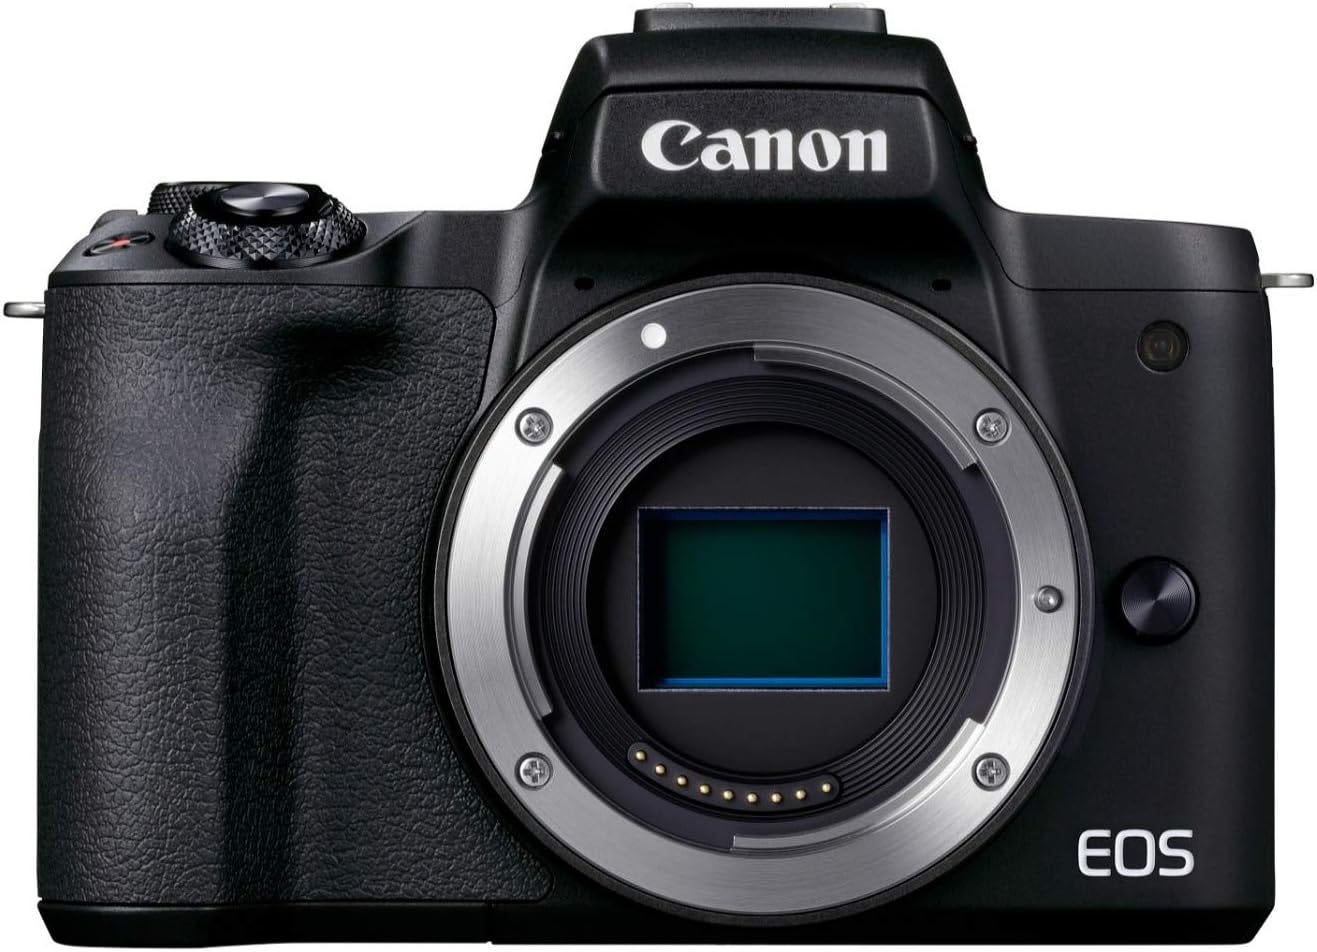 Canon EOS M50 Mark II mirrorless camera for golf course photography